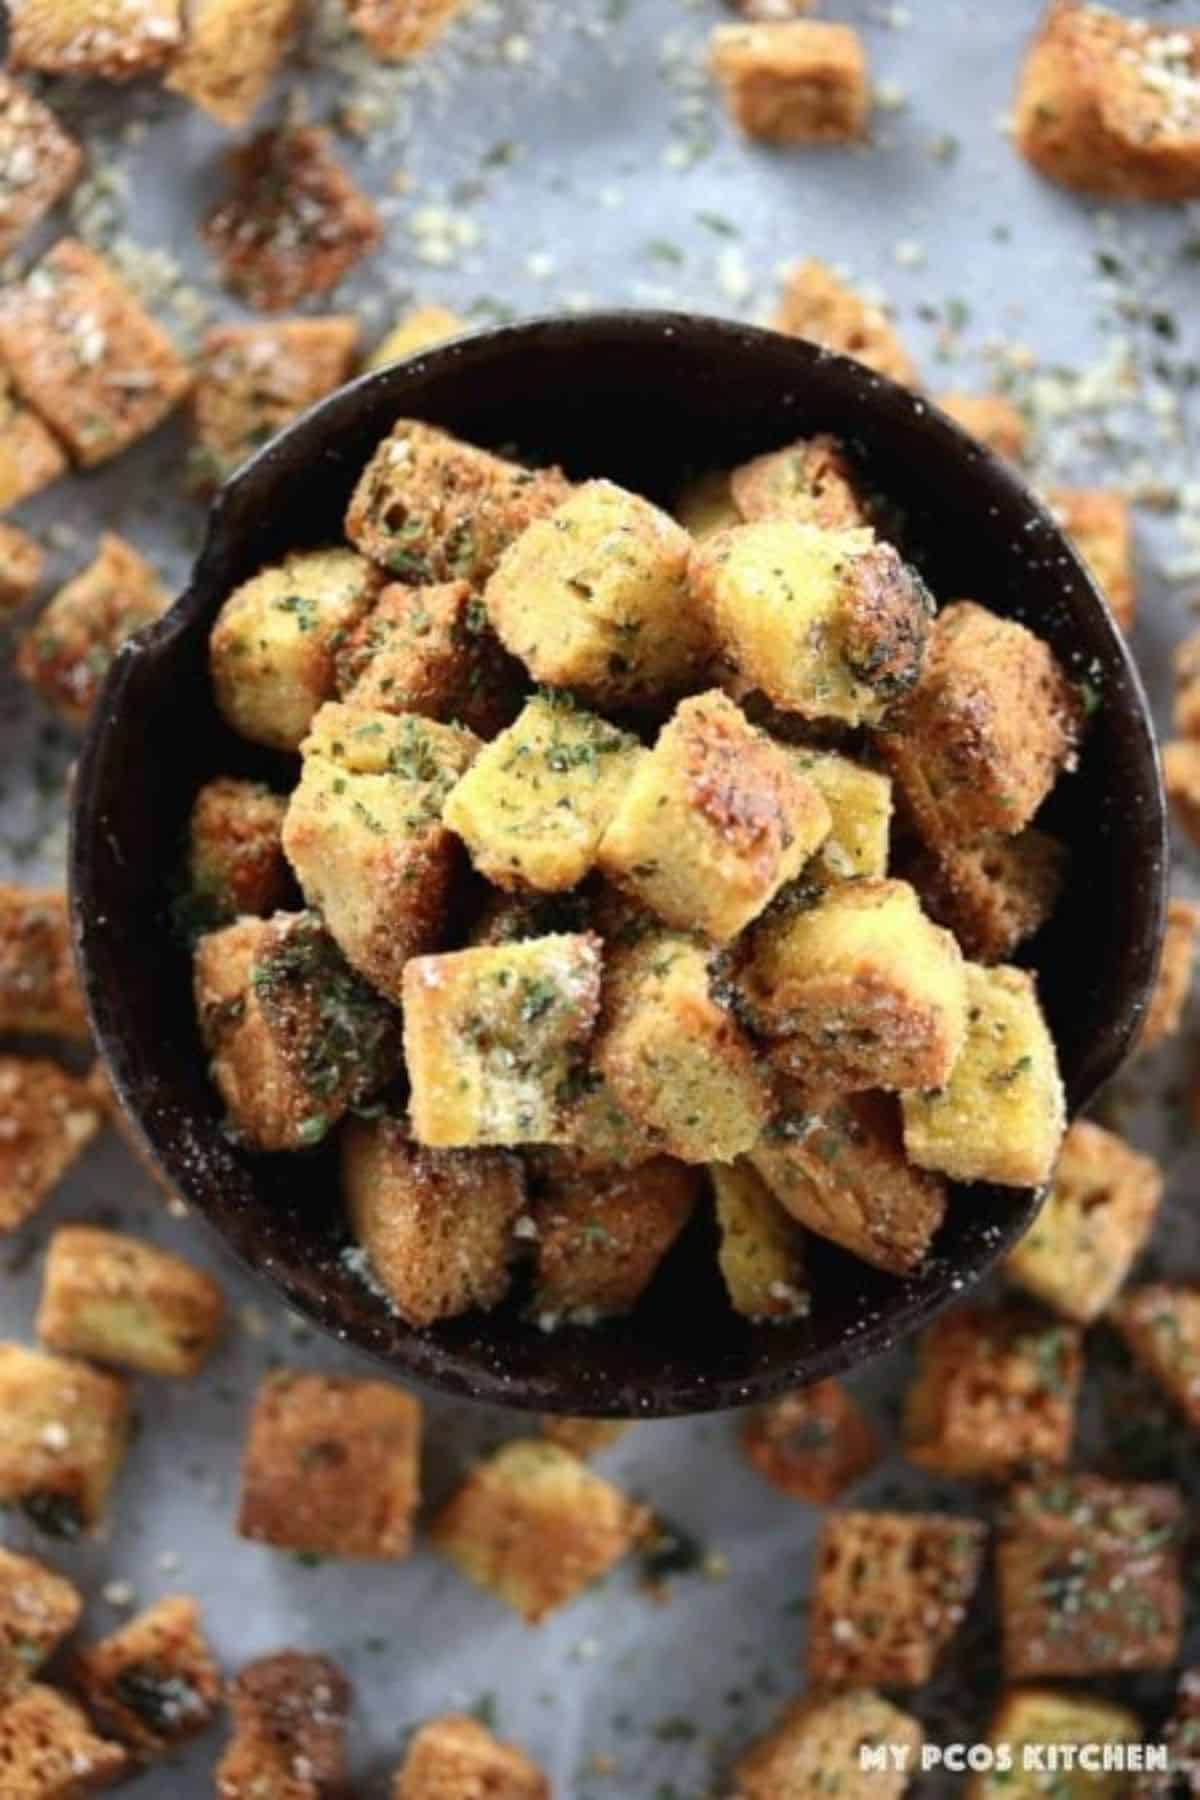 Crispy Low-Carb Gluten-Free Croutons in a black bowl.